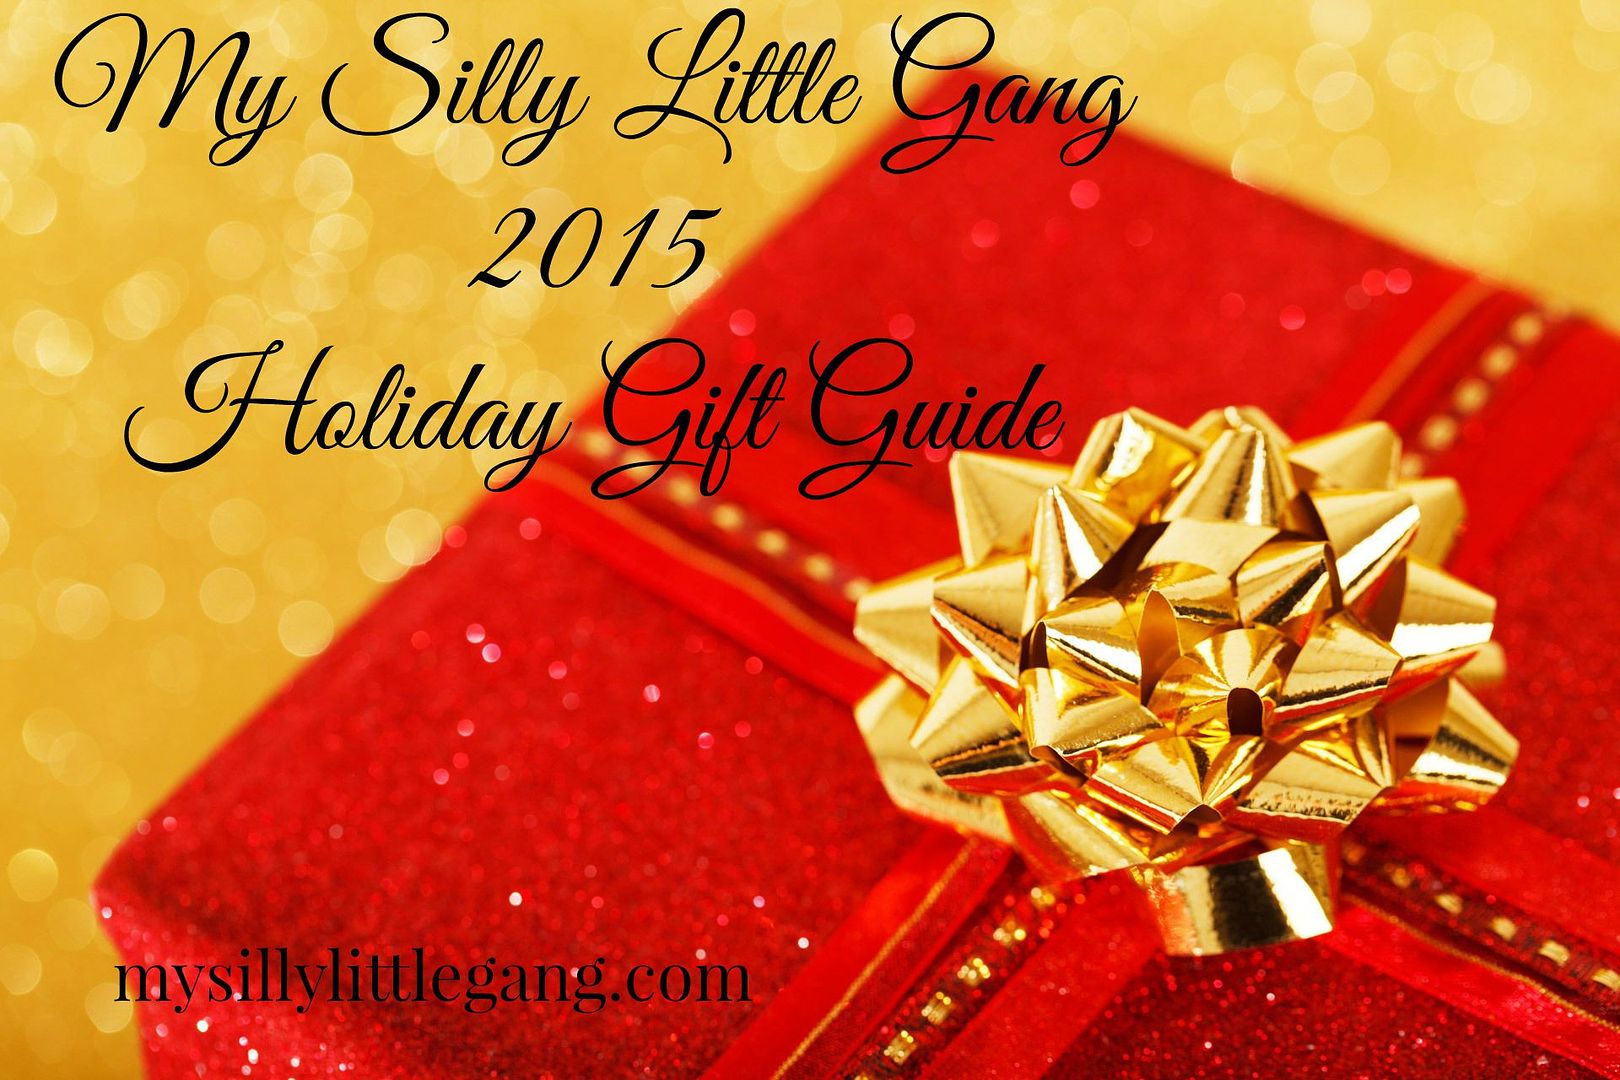 2015-holiday-gift-guide-mysillylittlegang-my-silly-little-gang